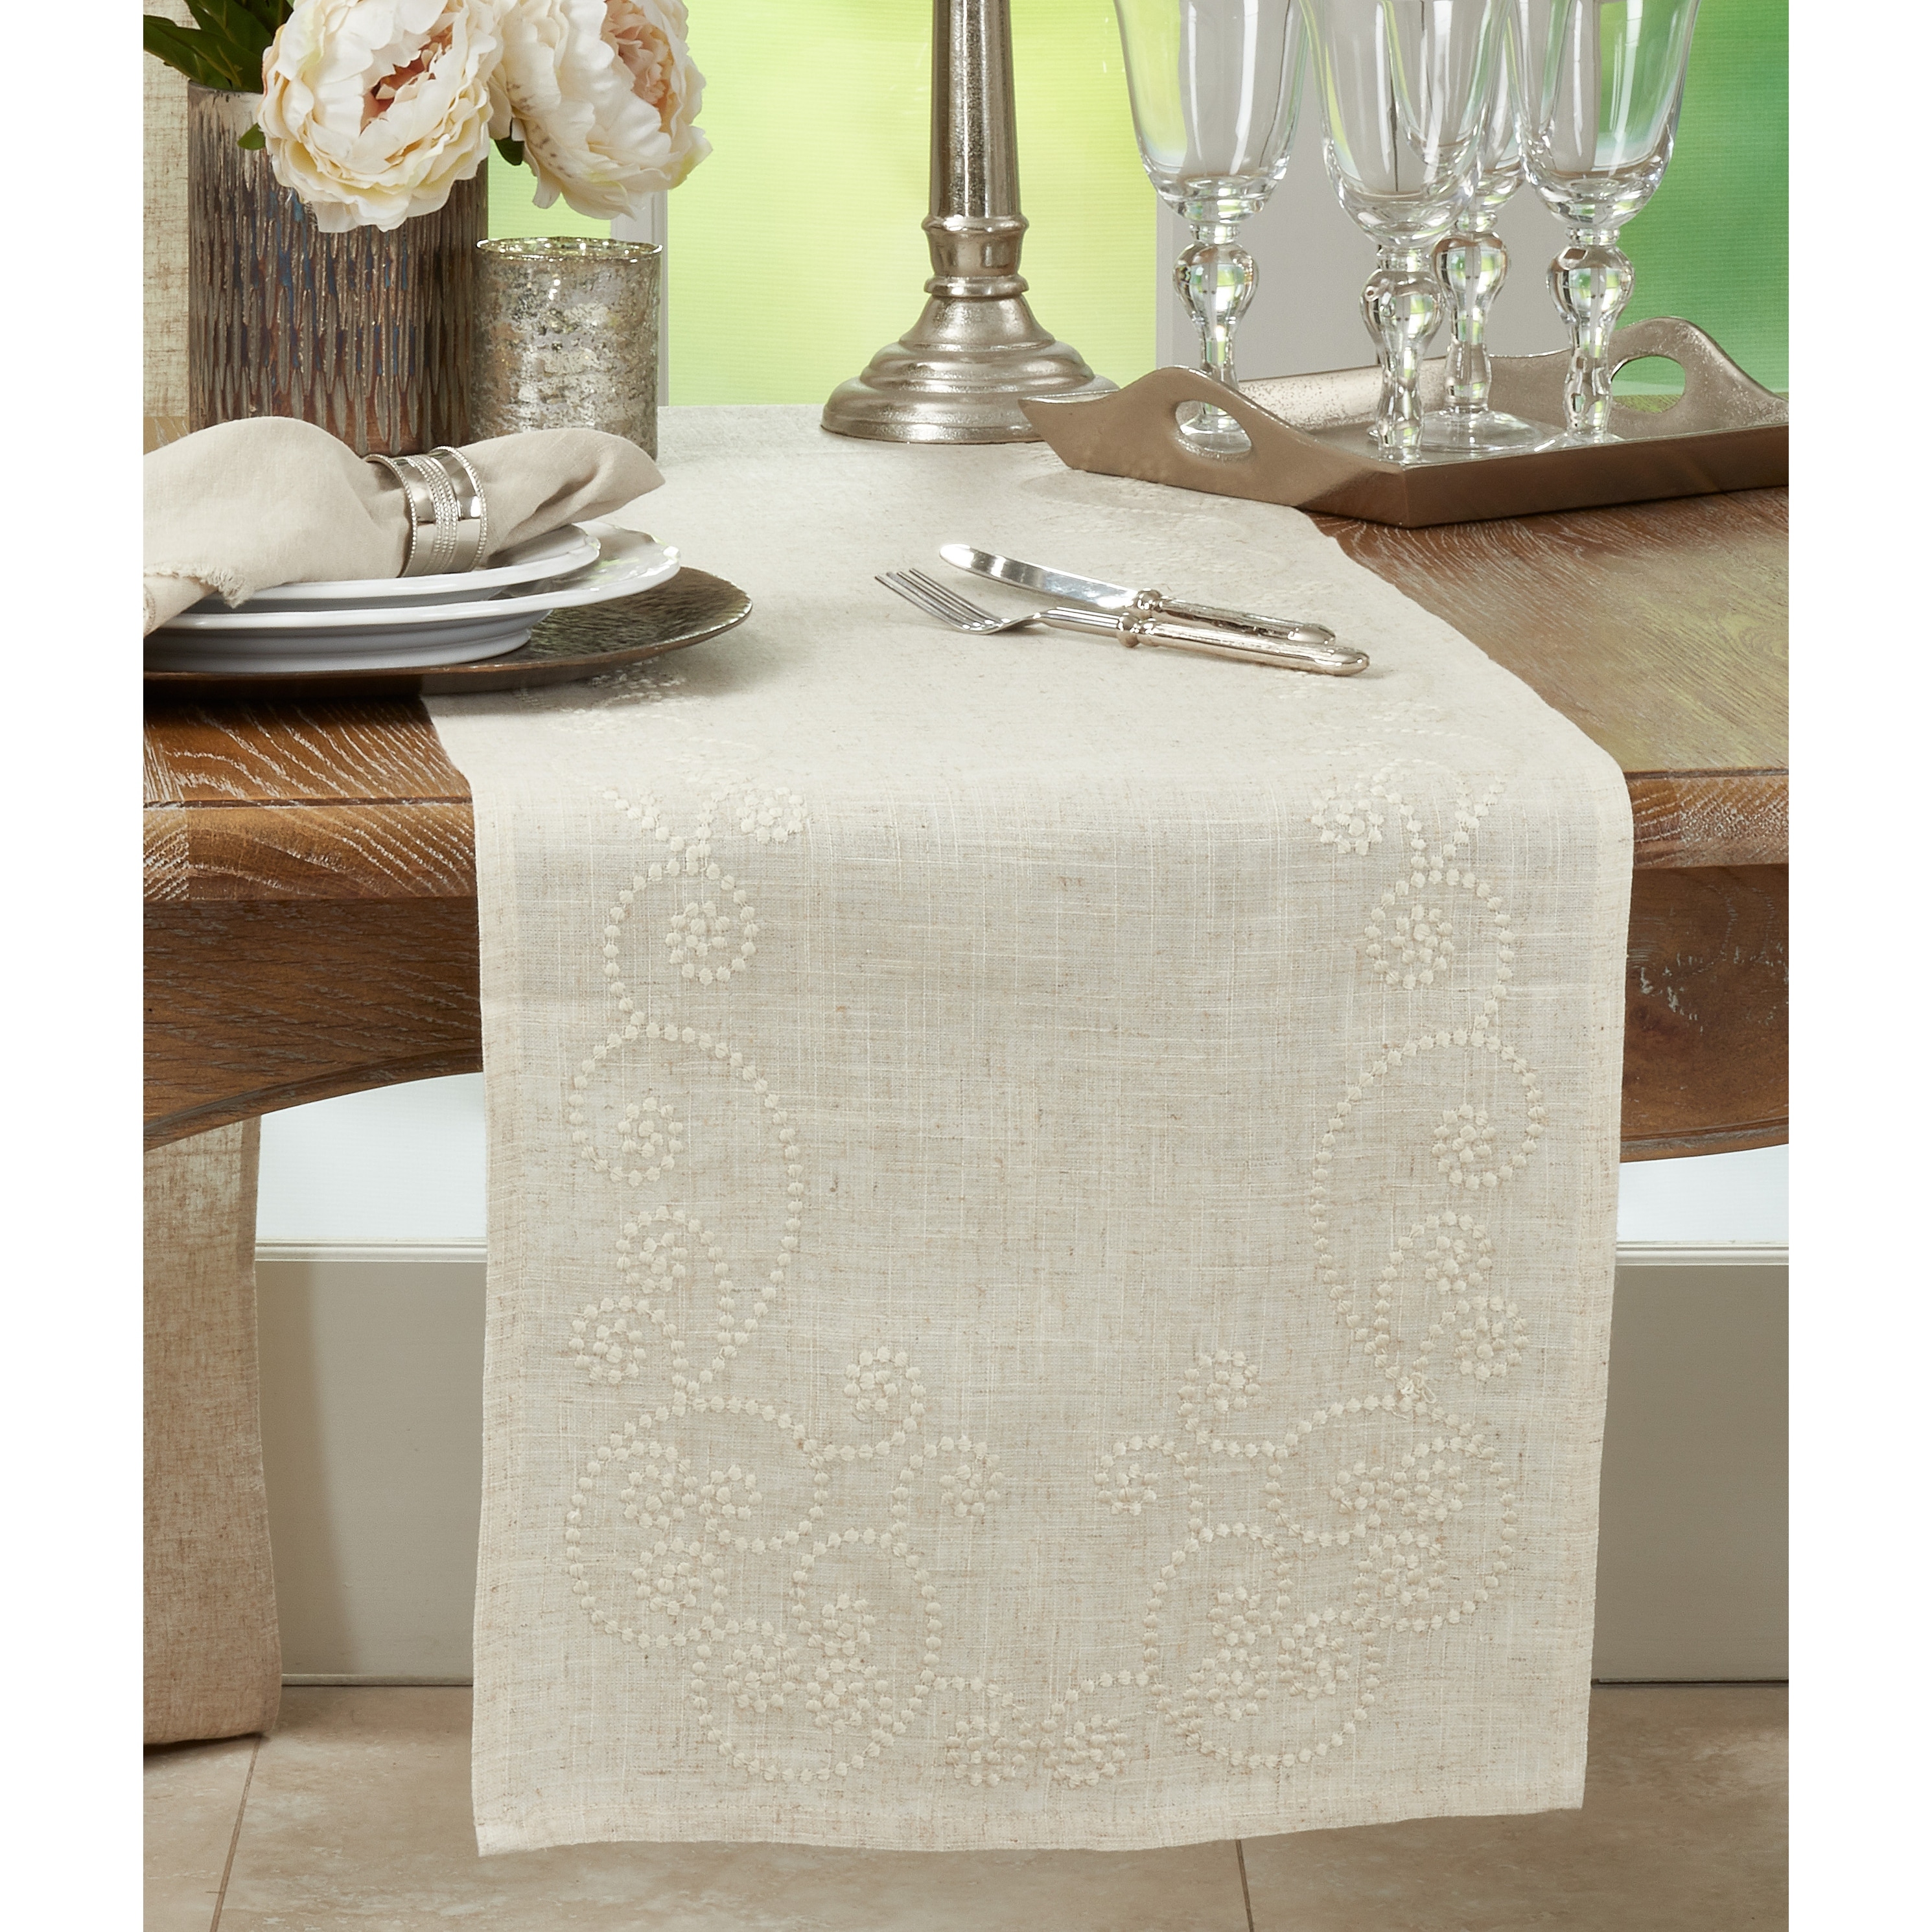 Handcrafted Graphite Solino Home 100% Pure Linen Fringe Table Runner – 14 x 108 Inch Natural Fabric 